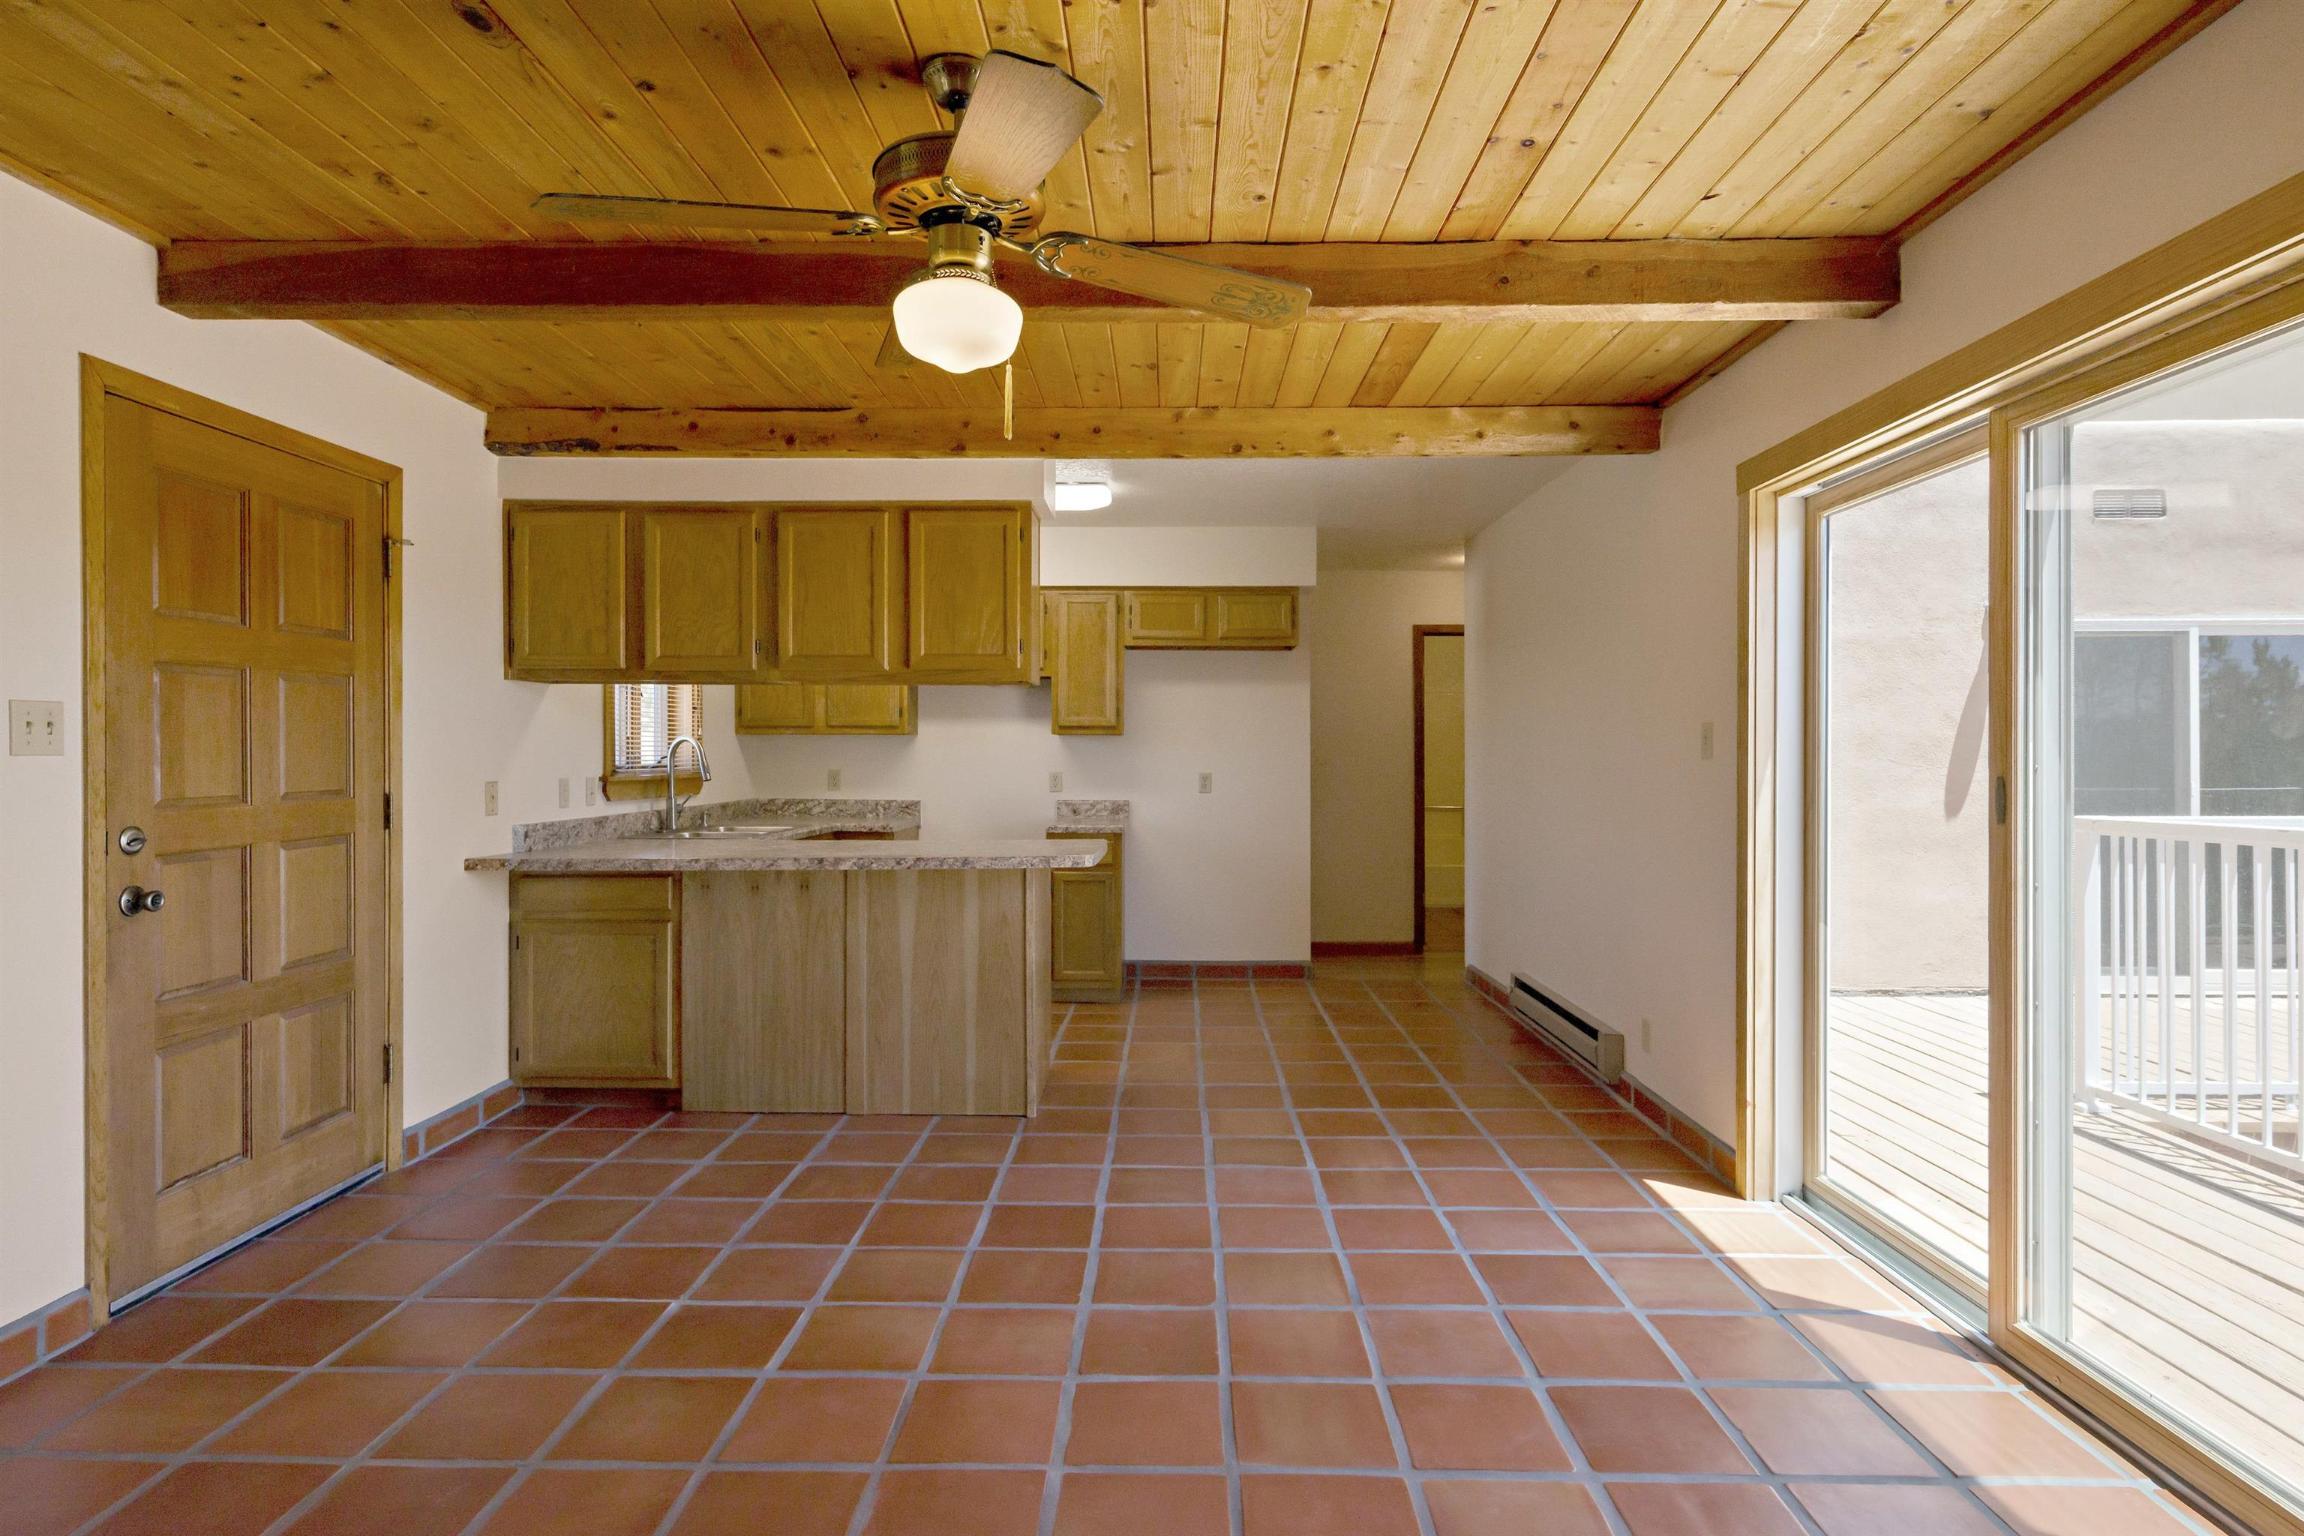 32 Lone Pine Spur, Santa Fe, New Mexico 87505, 3 Bedrooms Bedrooms, ,3 BathroomsBathrooms,Residential,For Sale,32 Lone Pine Spur,202202099